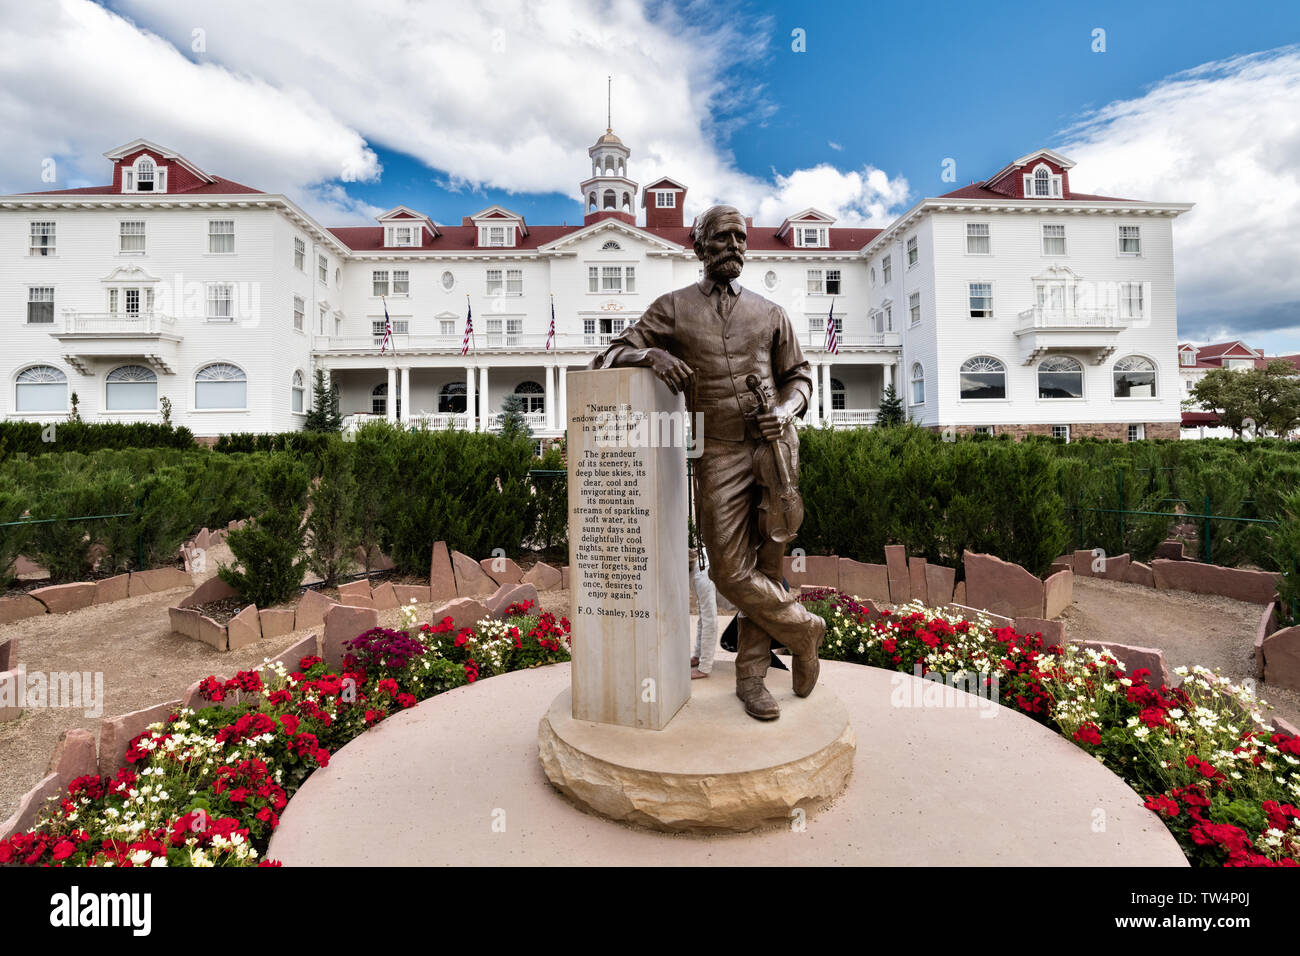 Statue of Freelan Oscar Stanley, inventor of the Stanley Steamer and the historic Stanley Hotel, a 142-room Colonial Revival hotel built in 1909, near the entrance to Rocky Mountain National Park in Estes Park, Colorado. The hotel served as the inspiration for the Overlook Hotel in the Stephen King bestselling novel The Shining. Stock Photo